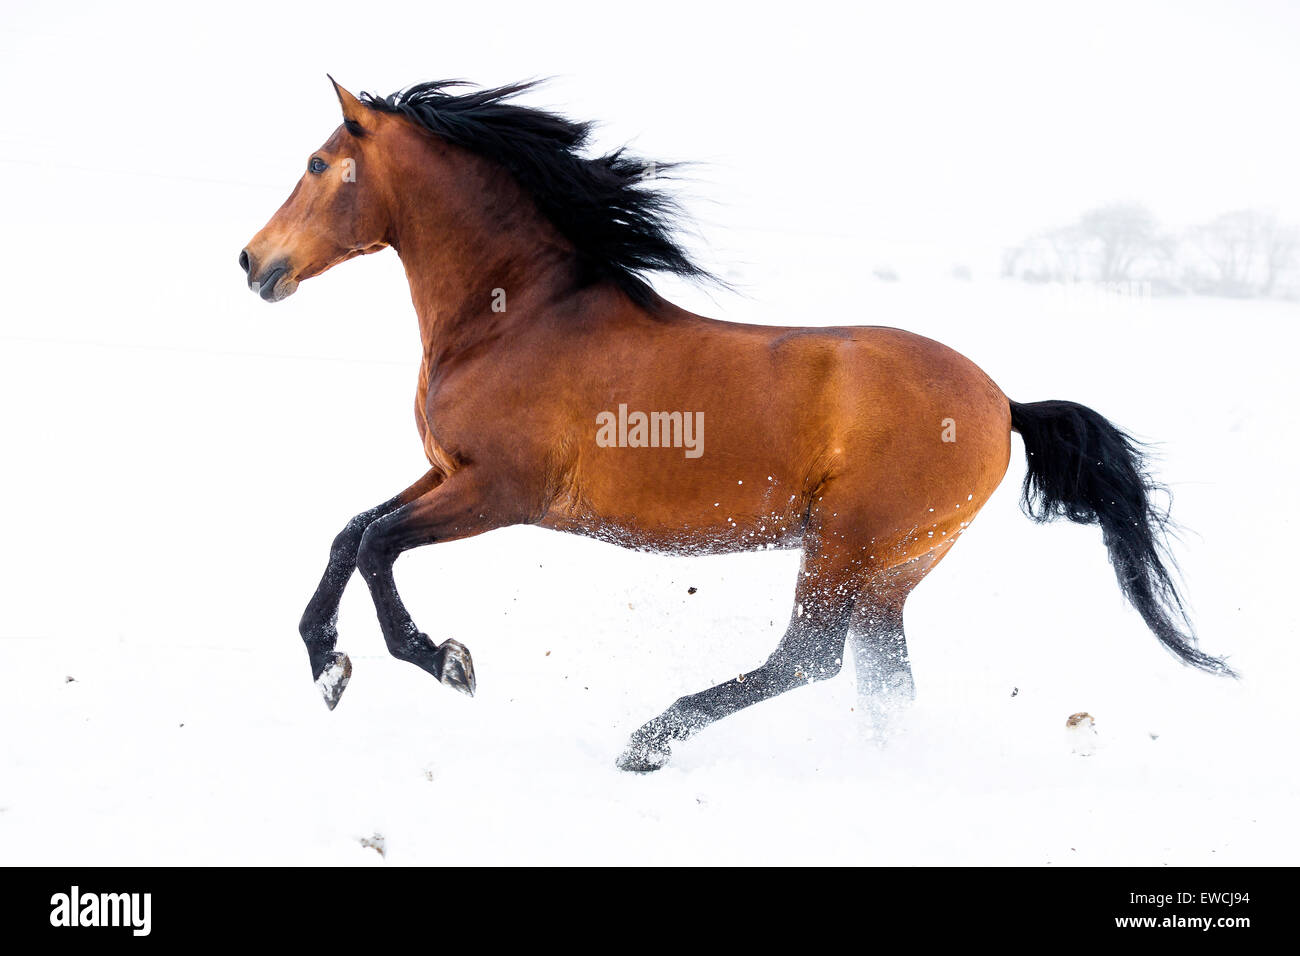 Pure Spanish Horse, Andalusian. Bay stallion galloping on a snowy pasture. Germany Stock Photo